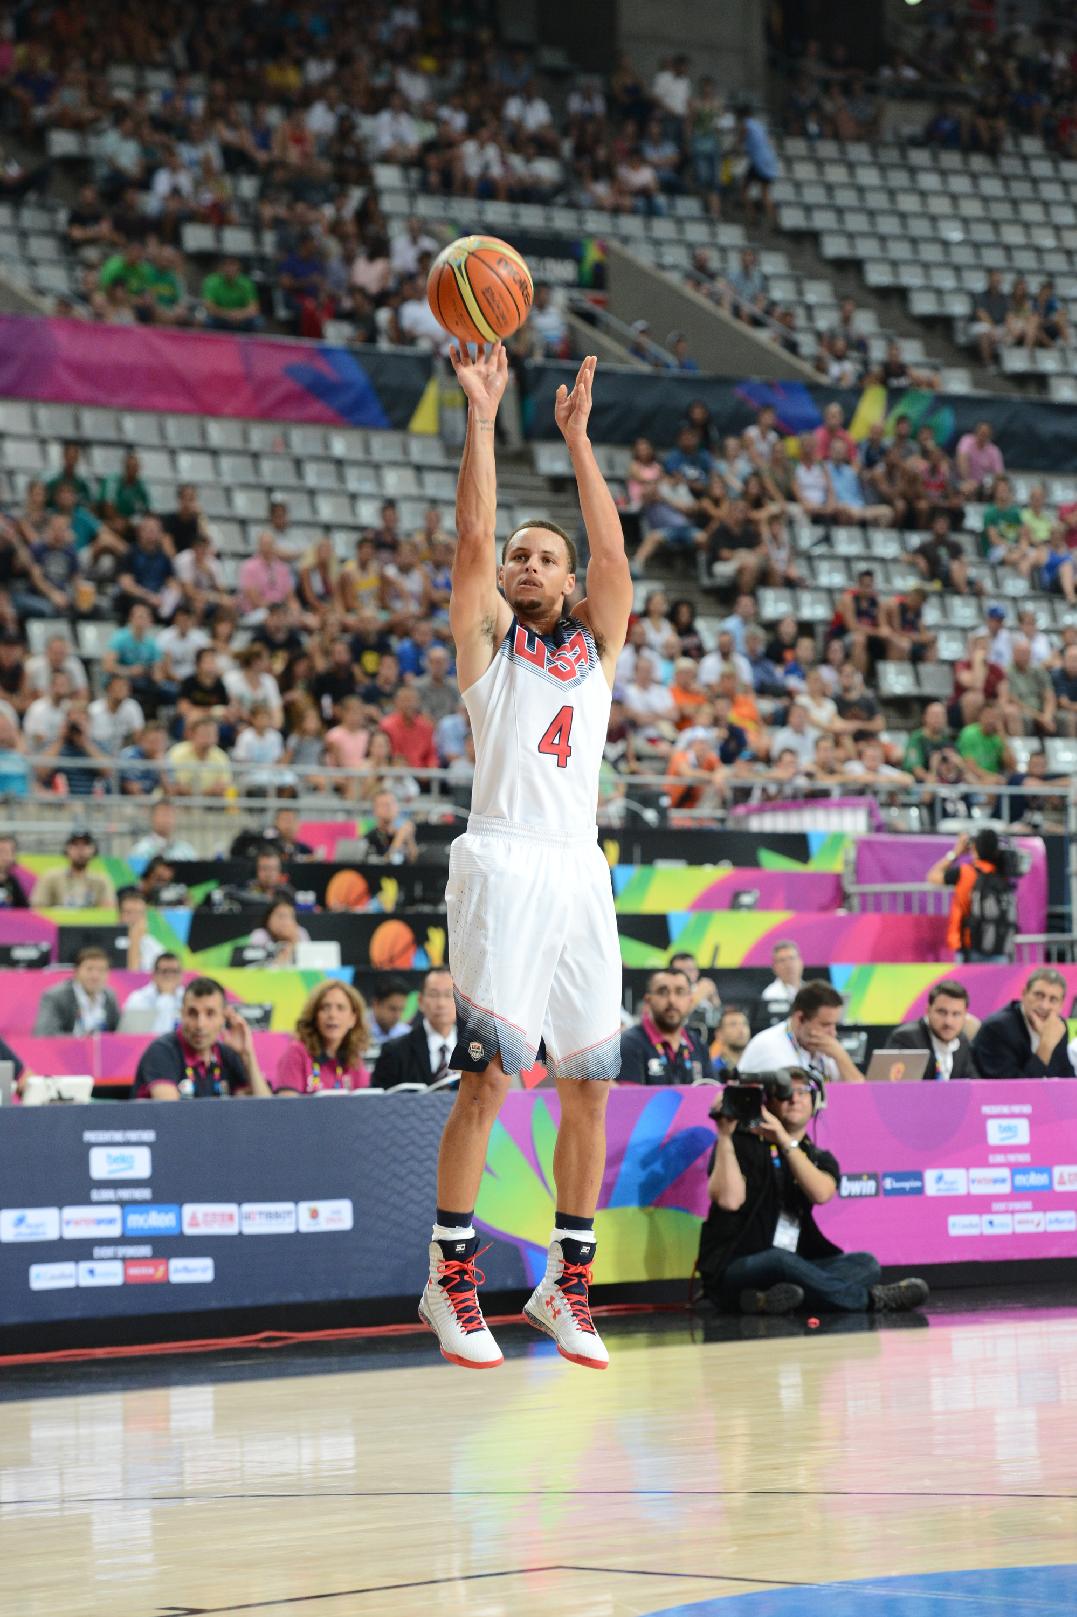 Stephen Curry was a member of the Team USA Group that captured gold at the 2014 FIBA World Cup in Spain. (Garrett Ellwood/Getty Images)